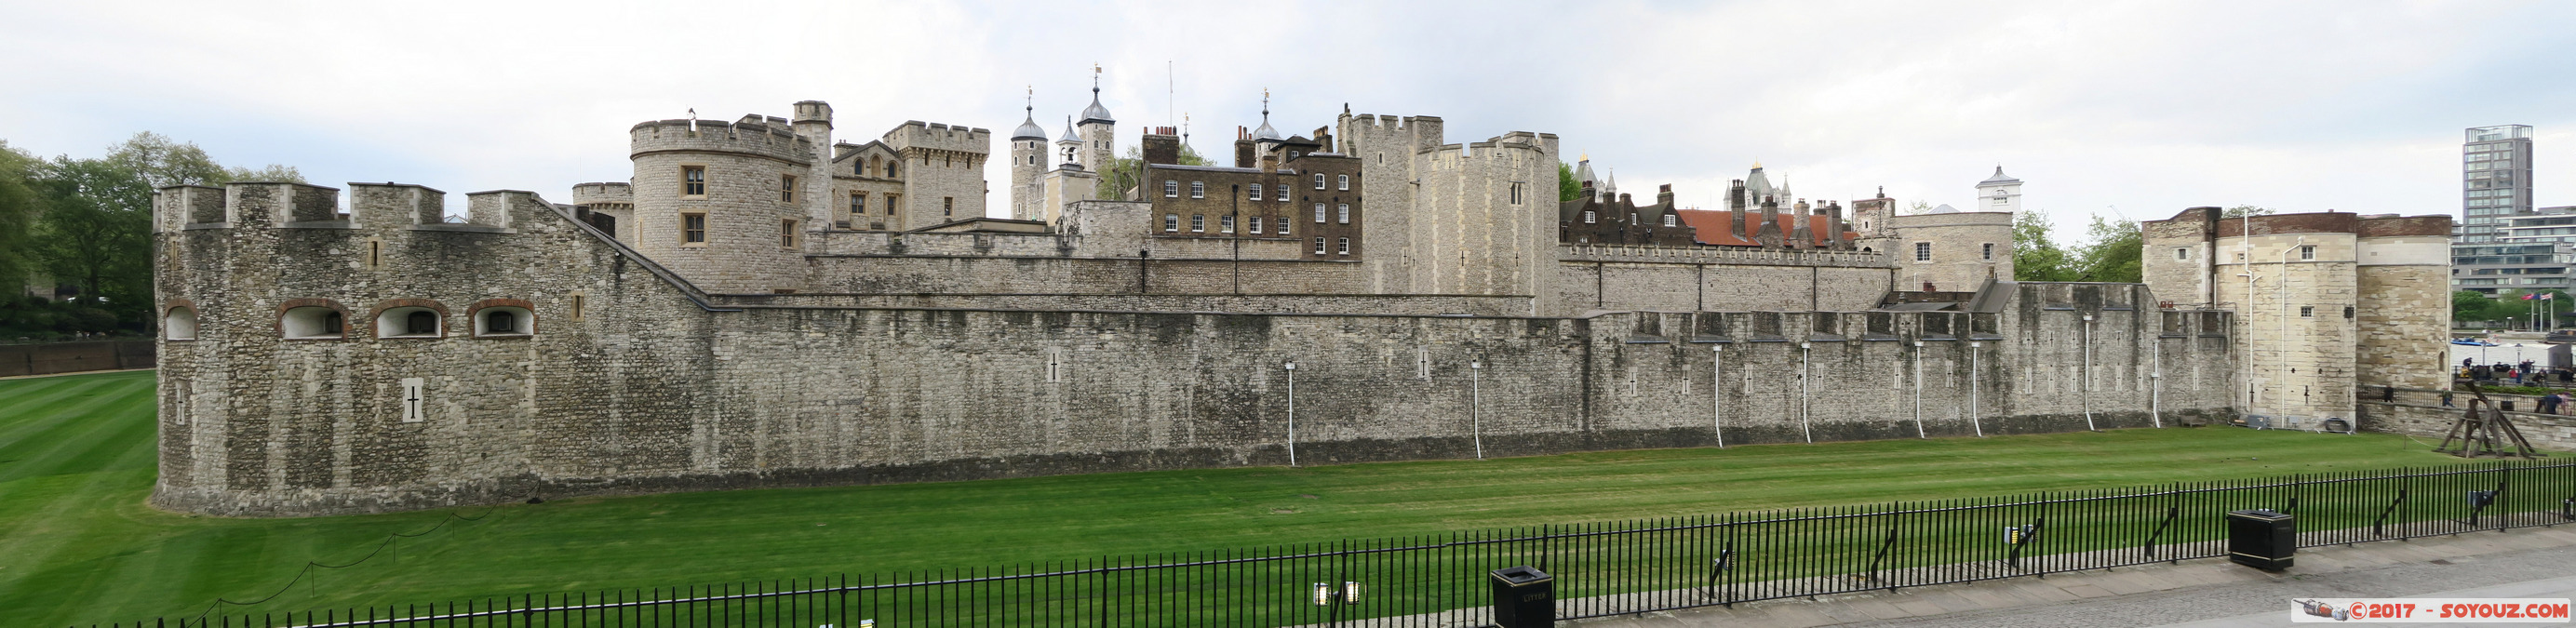 The Tower of London - panorama
Mots-clés: England GBR geo:lat=51.50887933 geo:lon=-0.07820000 geotagged Royaume-Uni St. Katharine's and Wapping Ward Whitechapel London Londres Tower of London chateau Tower Hamlets panorama patrimoine unesco